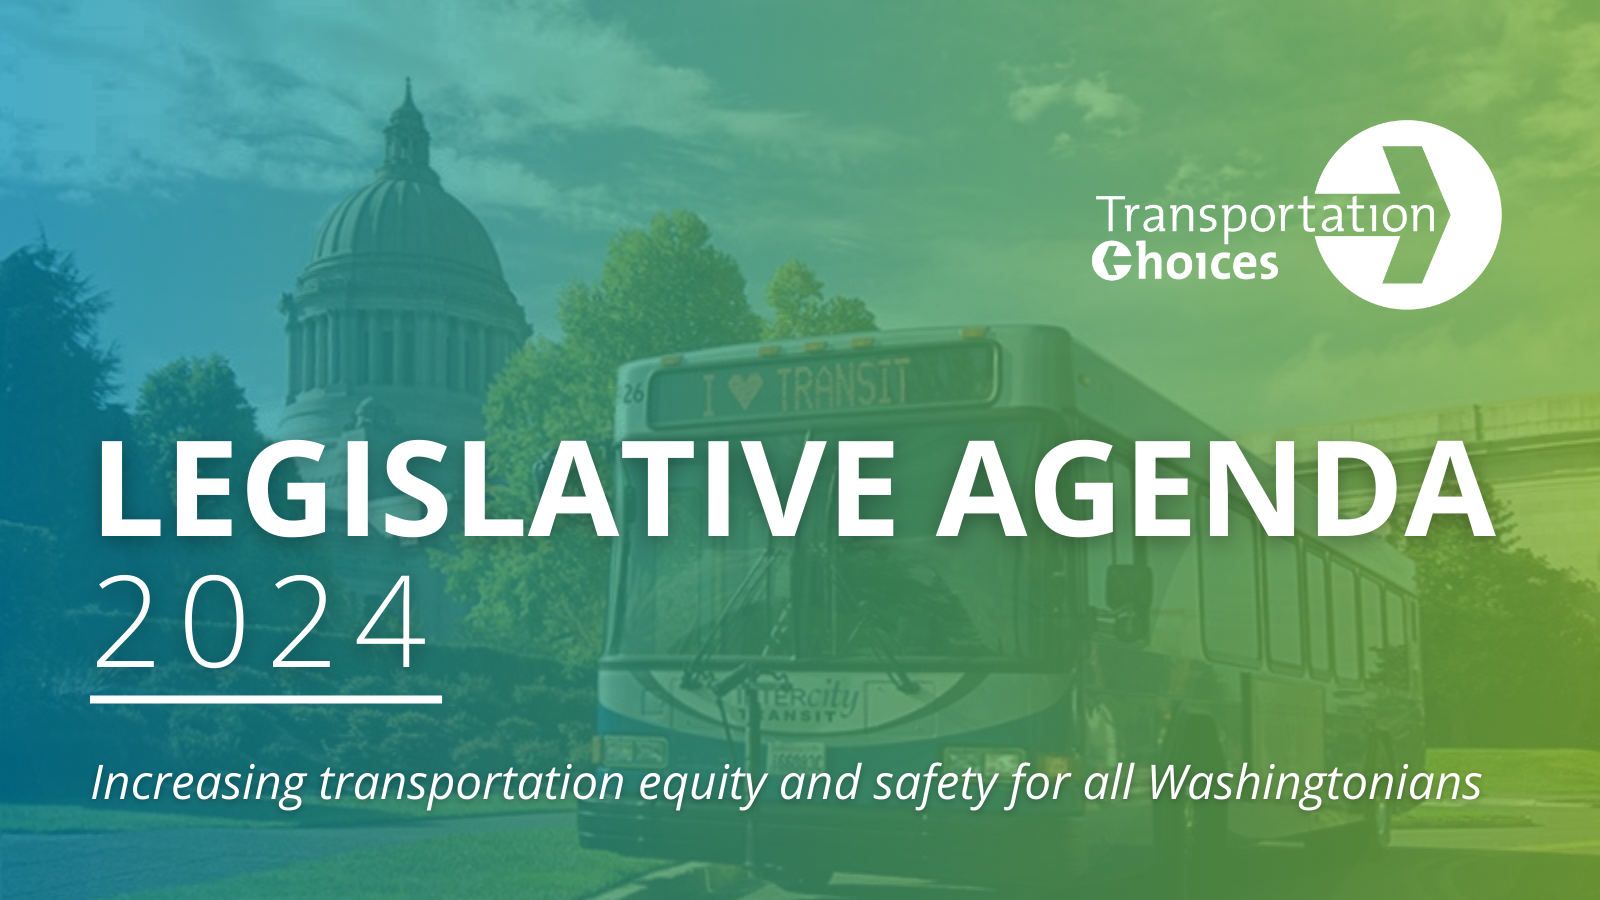 Image of a bus with "I HEART TRANSIT" on it in front of the capitol building. Text: Legislative Agenda 2024, Increasing transportation equity and safety for all Washingtonians